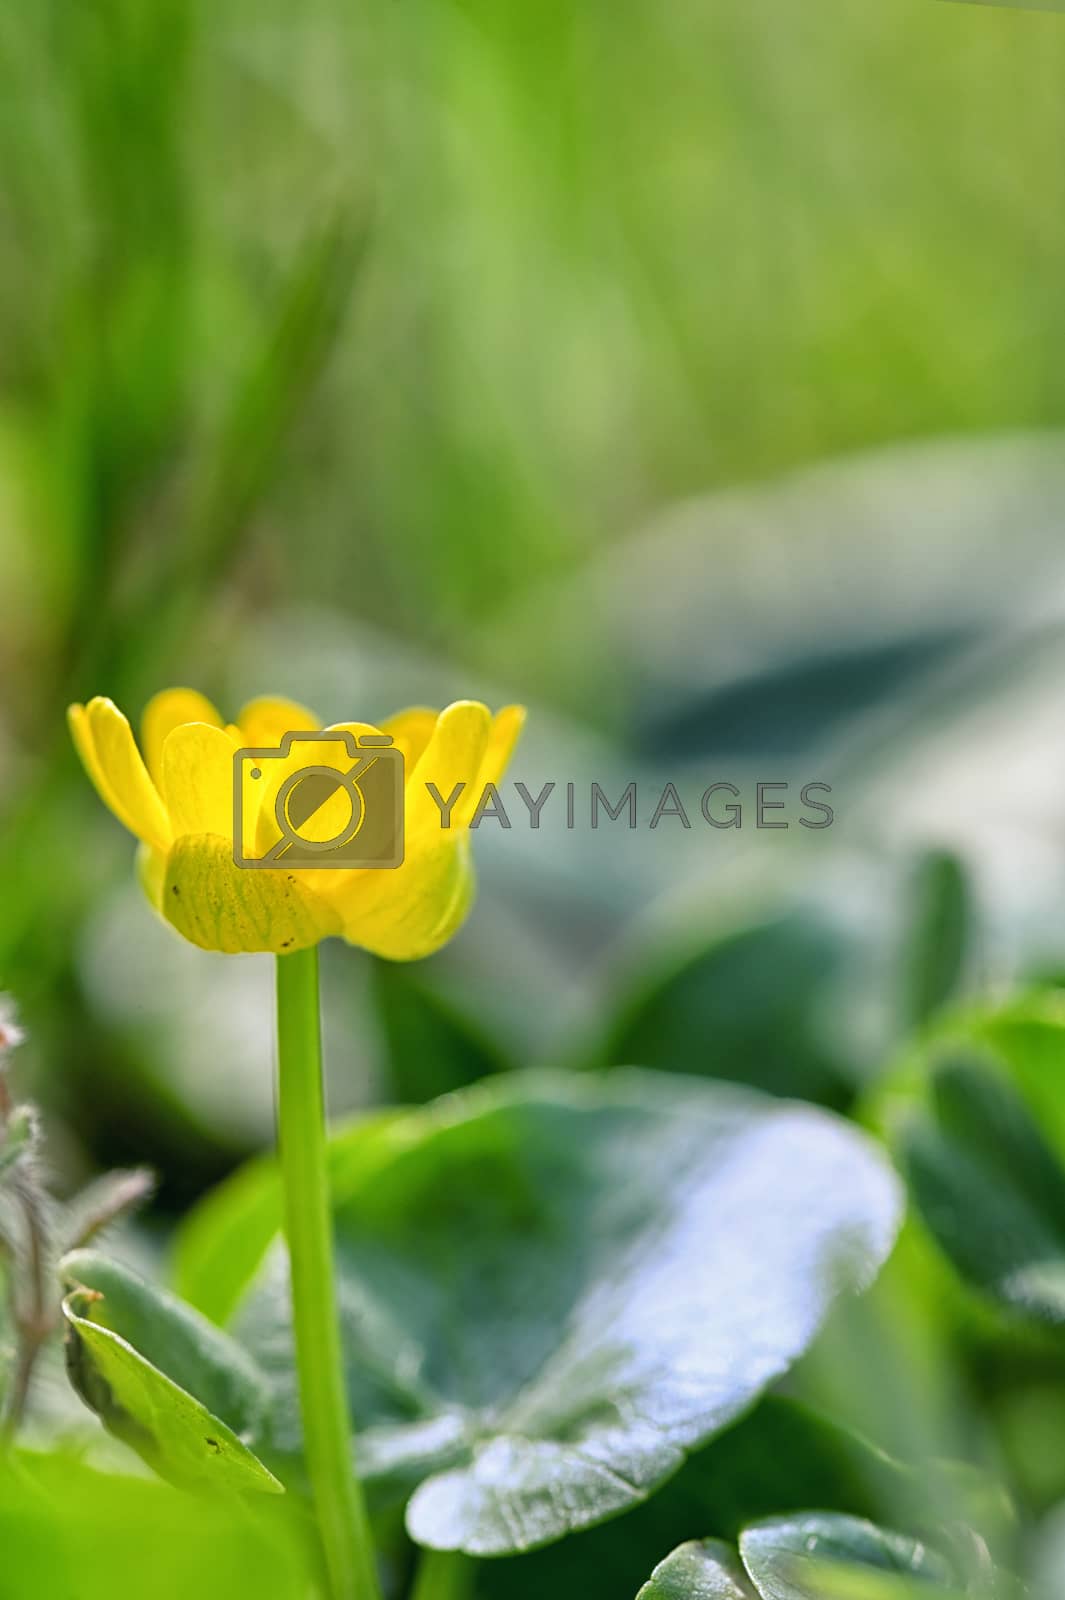 Royalty free image of A Fig Buttercup Blooming In Spring by mady70